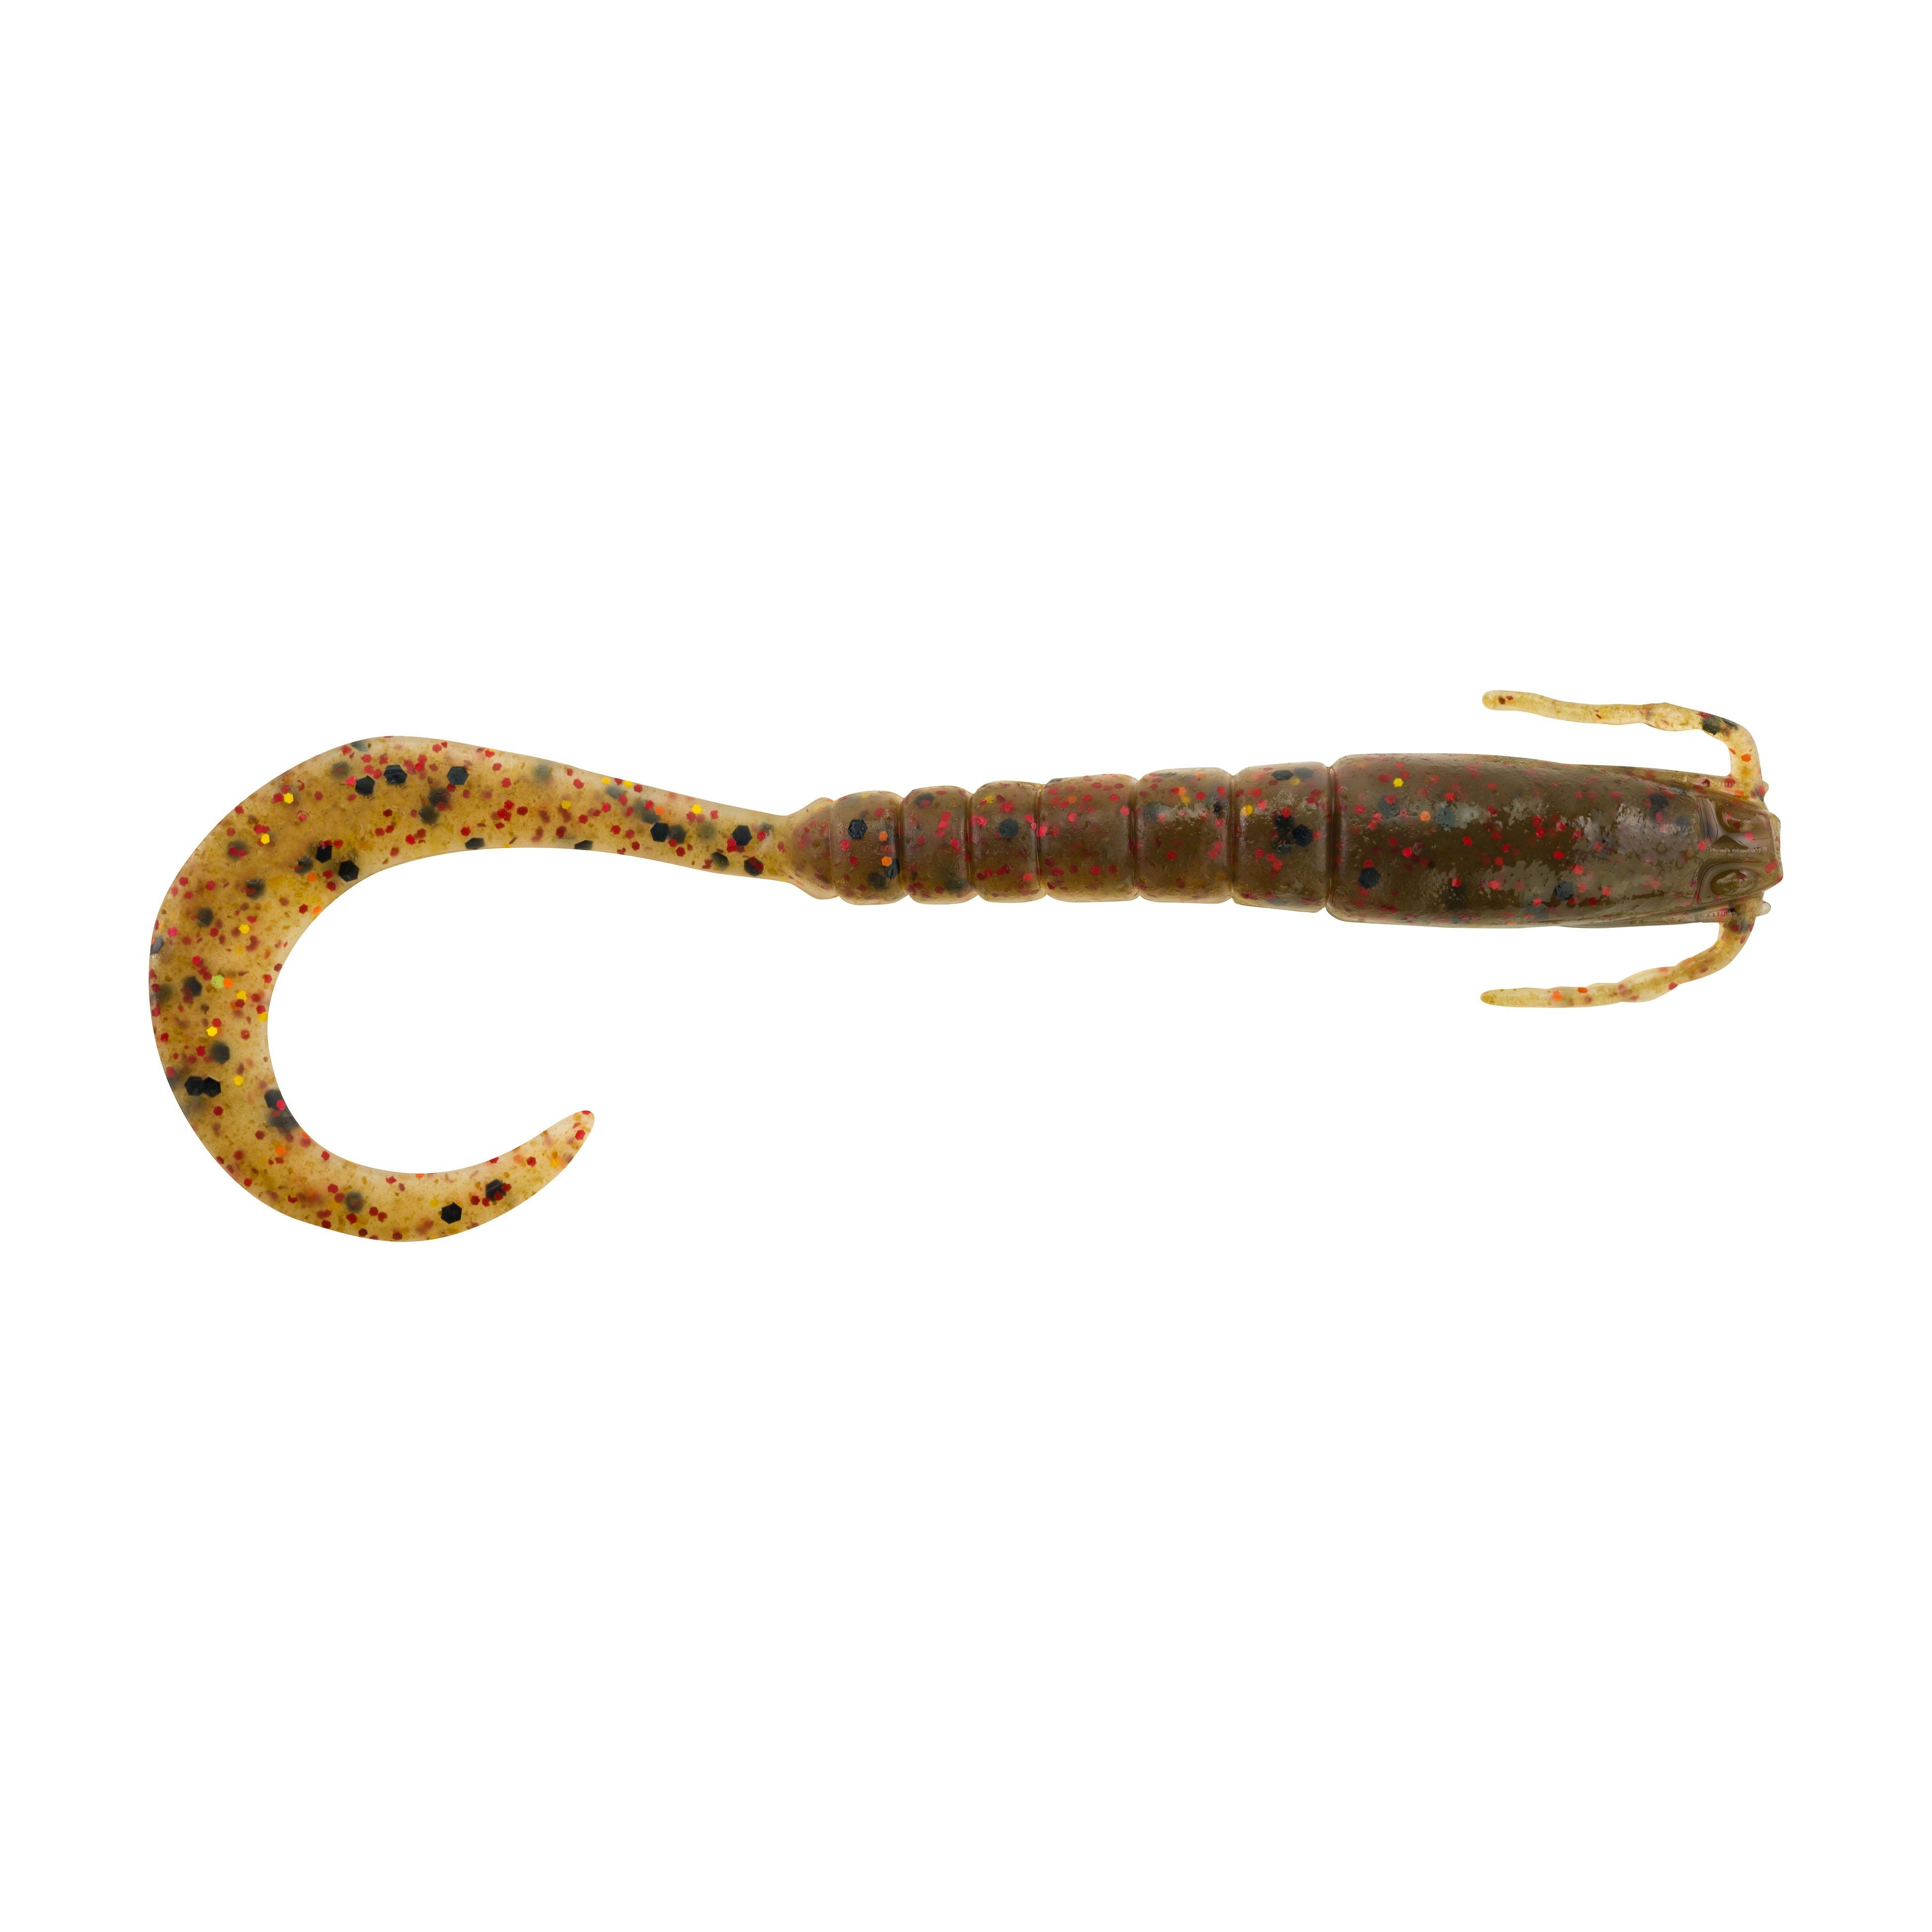 Berkley® Fishing is your one-stop shop for fishing baits. – Page 5